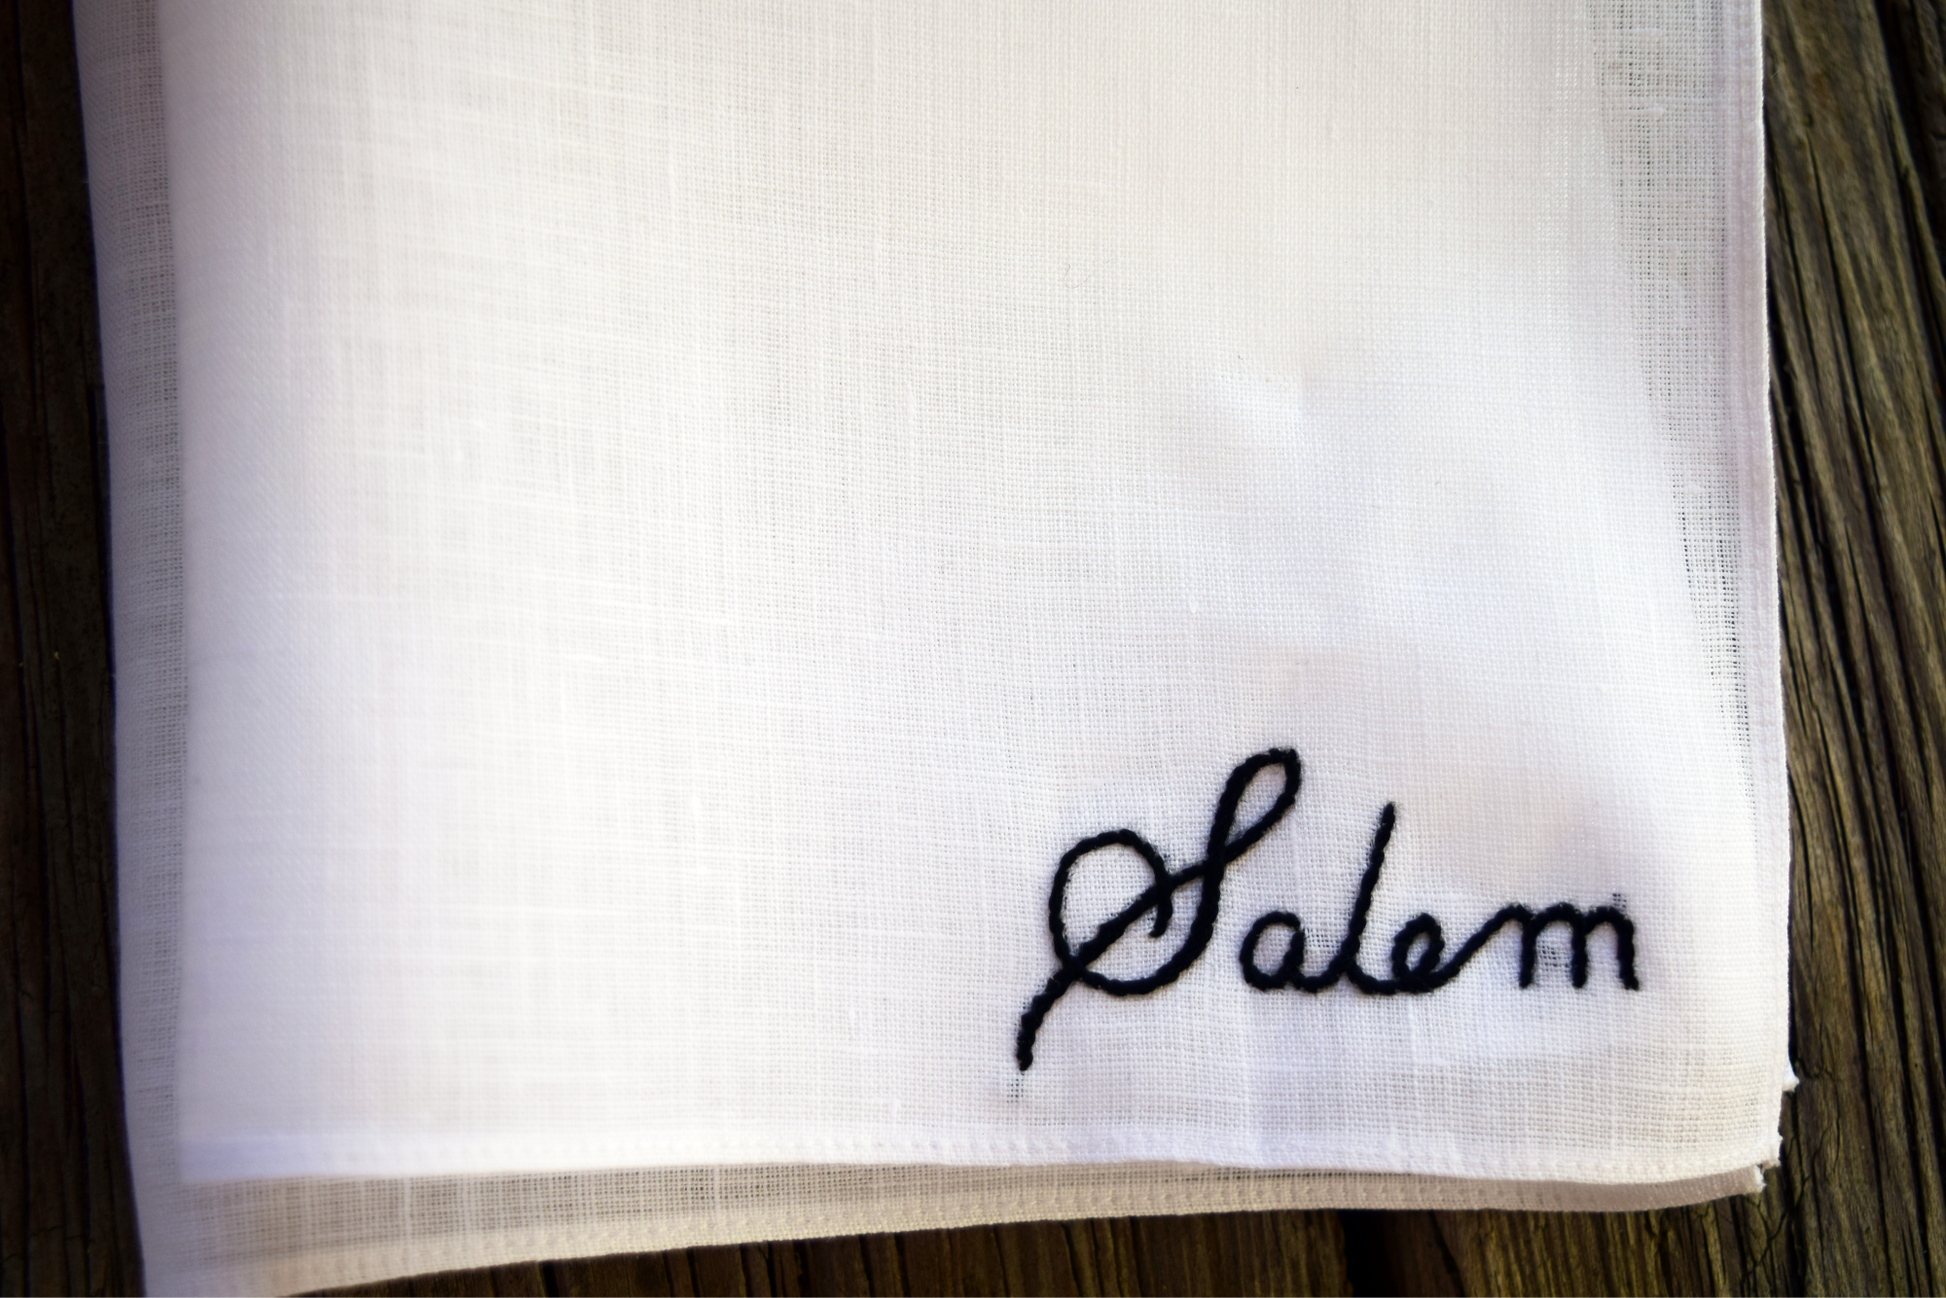 White linen handkerchief with embroidered name